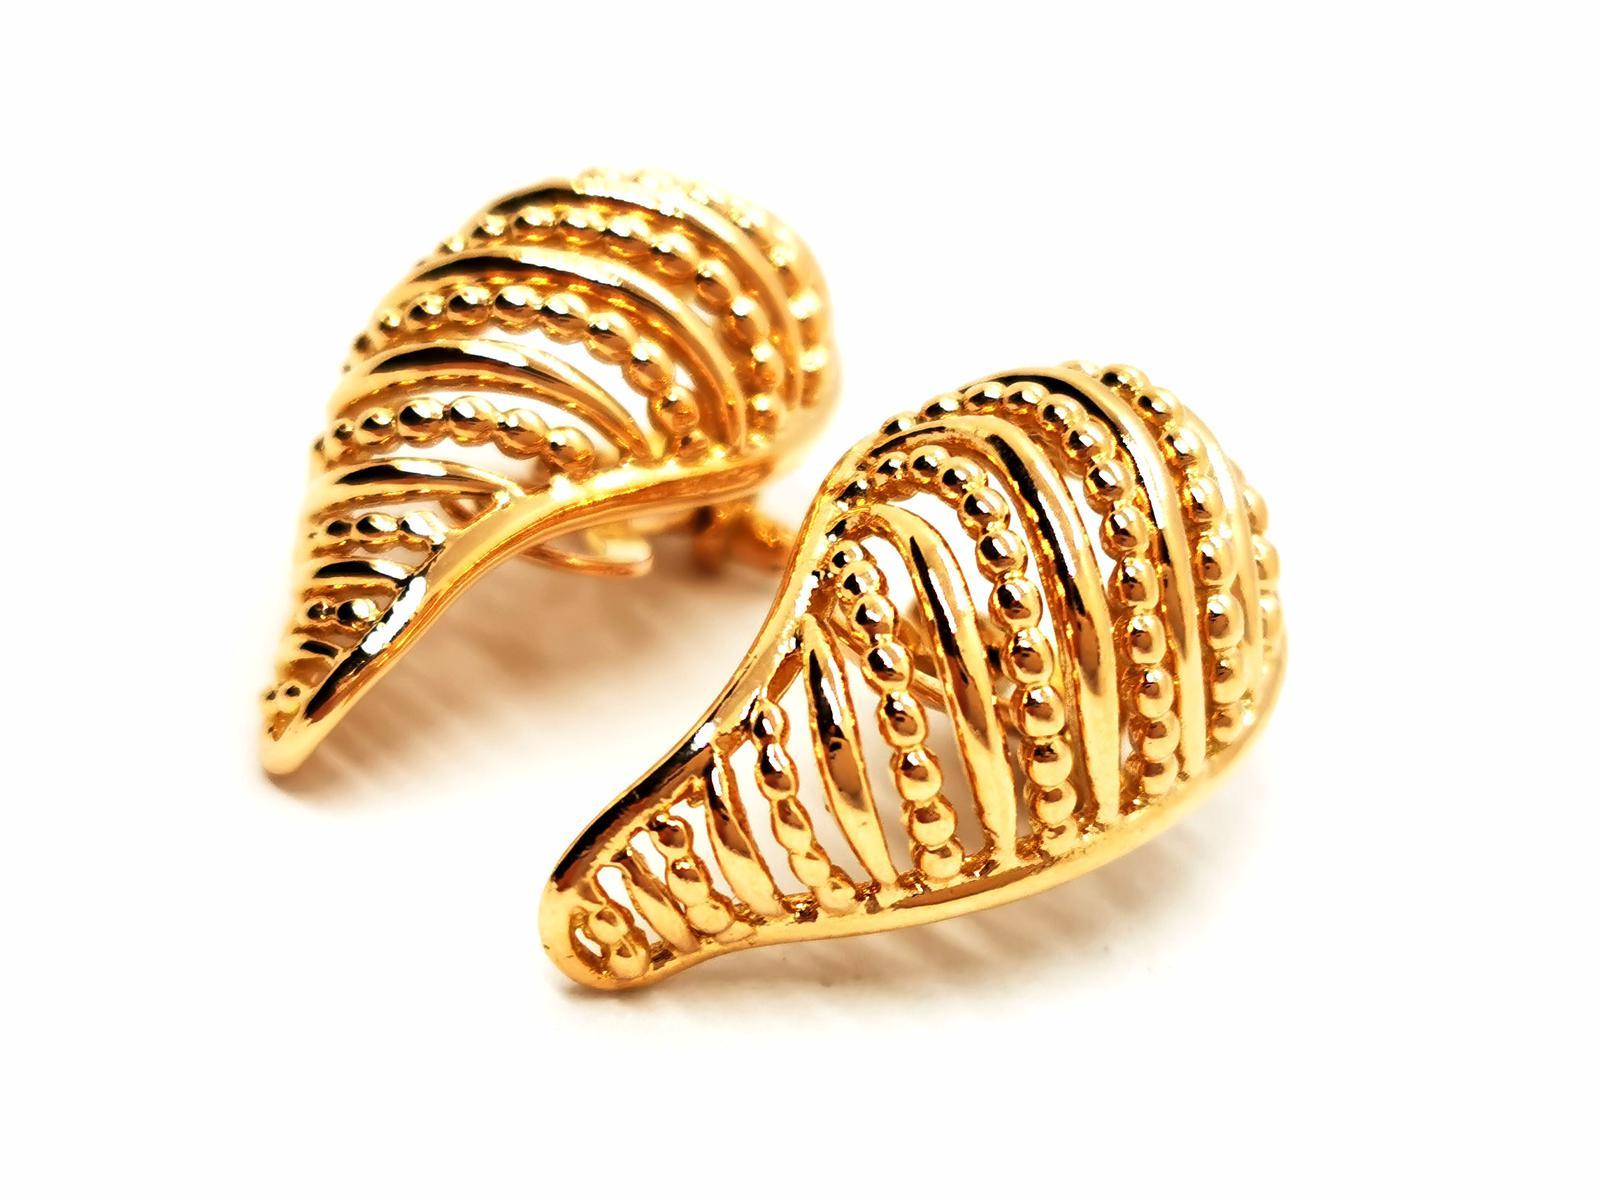 Pair of ear clips. in yellow gold 750 thousandths (18 carats). leaf pattern. openwork. alternate. dimensions: 2.57 cm X 1.39 cm. total weight: 12.34g. eagle head hallmark. excellent condition.
